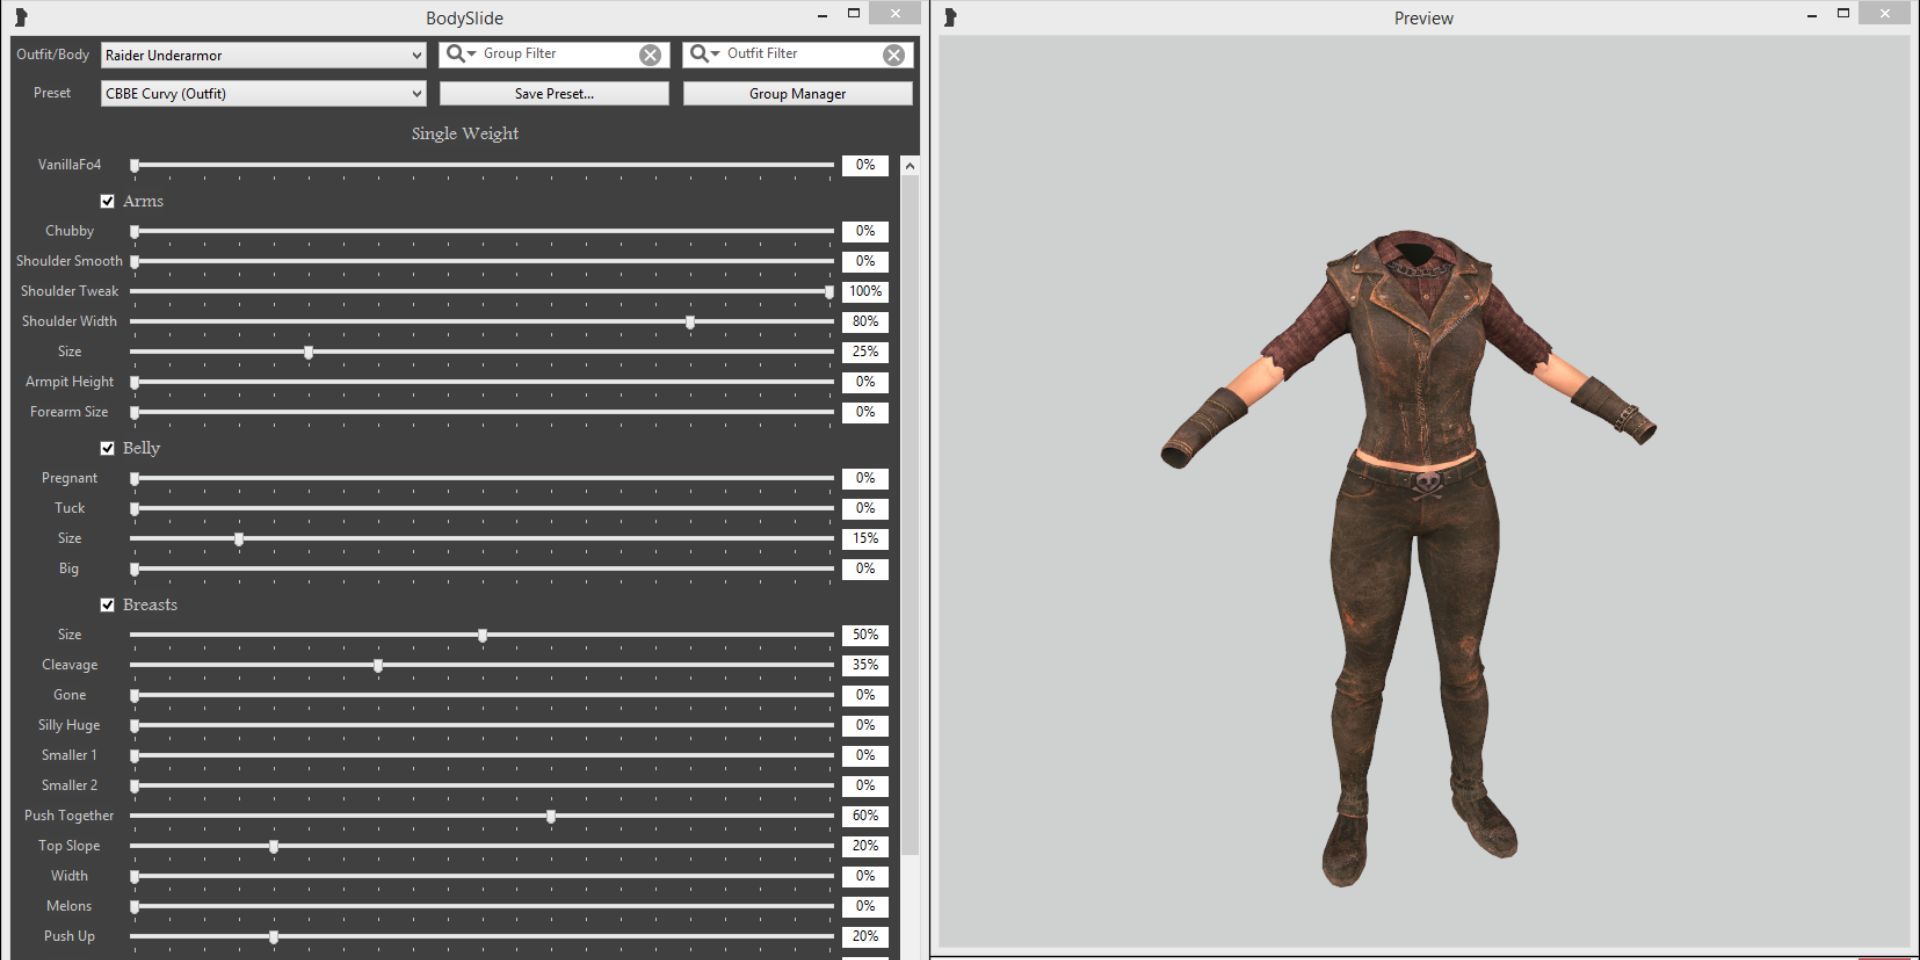 A picture from the Fallout 4 mod BodySlide and Outfit Studio